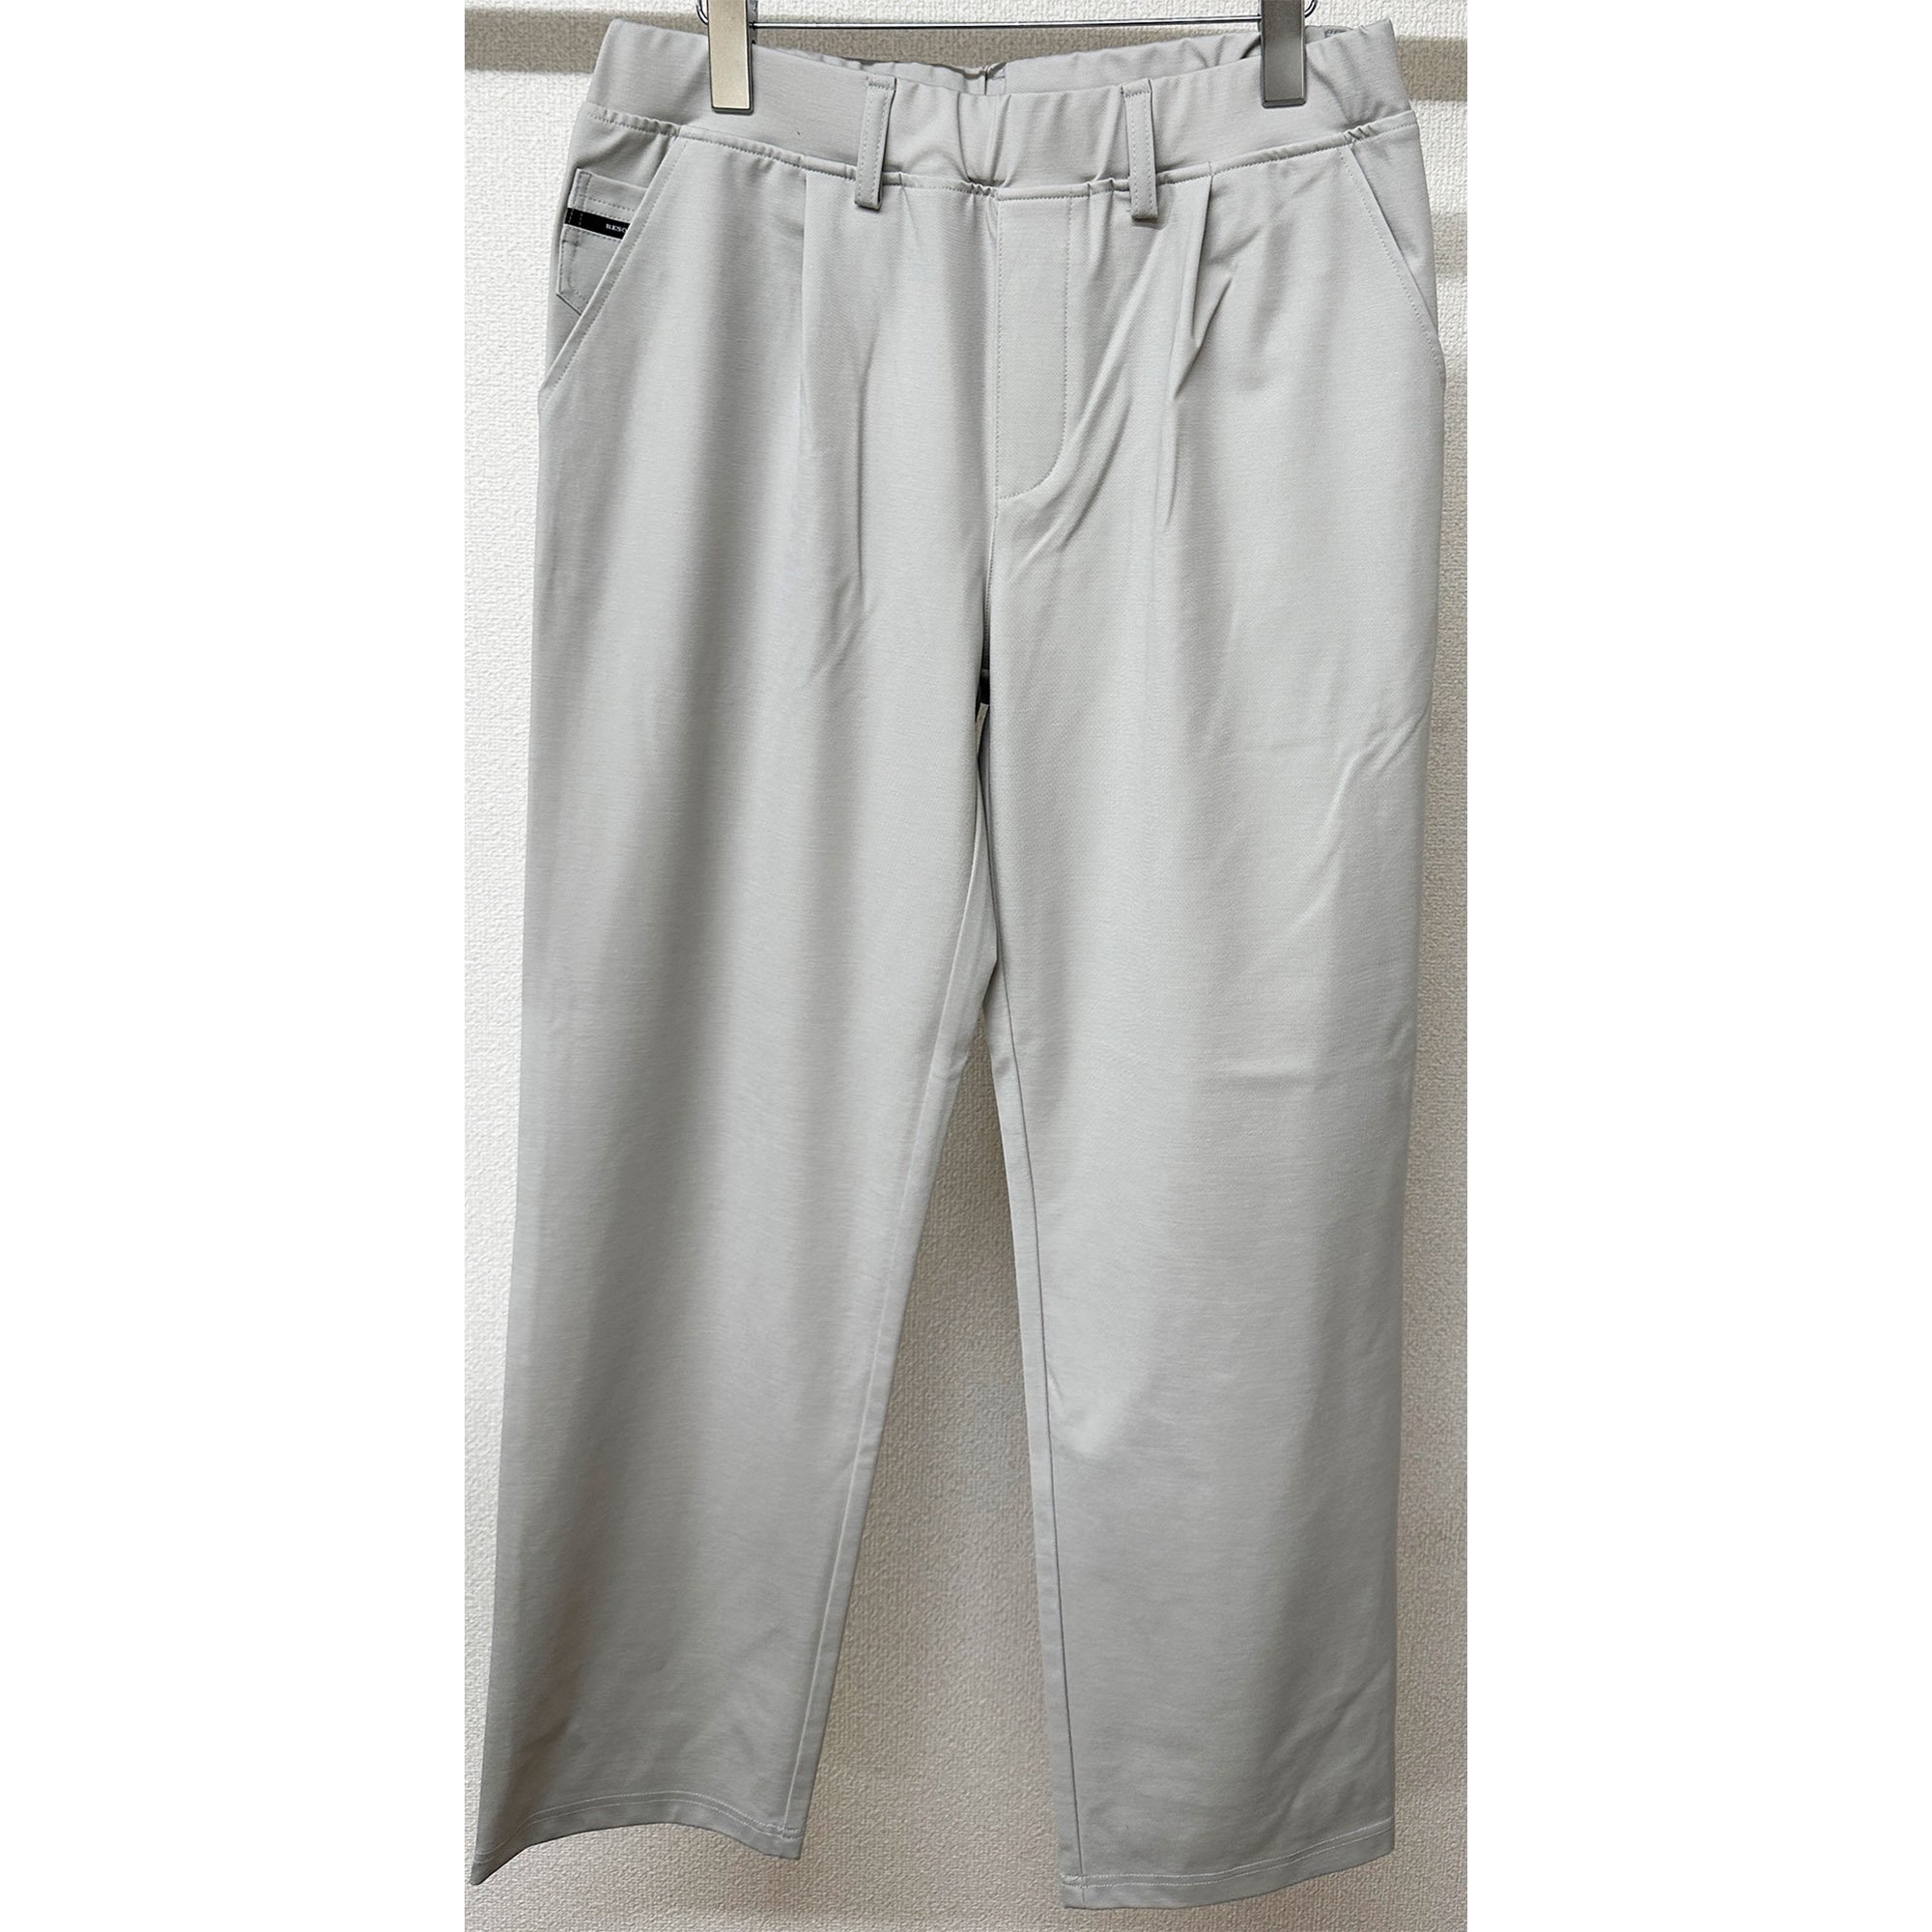 <img class='new_mark_img1' src='https://img.shop-pro.jp/img/new/icons1.gif' style='border:none;display:inline;margin:0px;padding:0px;width:auto;' />CHRIS EASY WIDE TUCK PANTS GREYGE